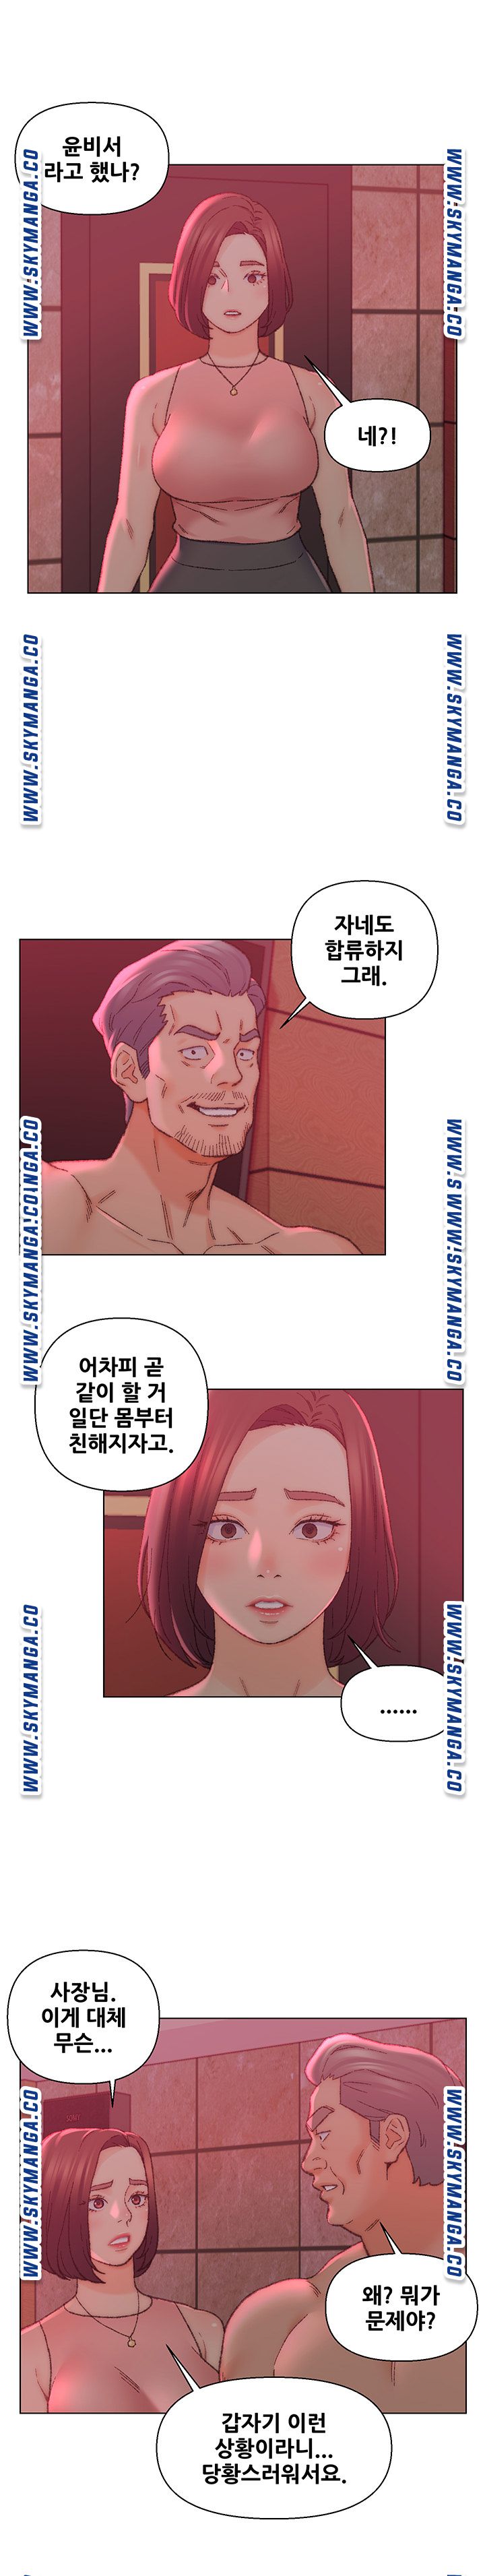 Dad Friend Raw - Chapter 22 Page 3